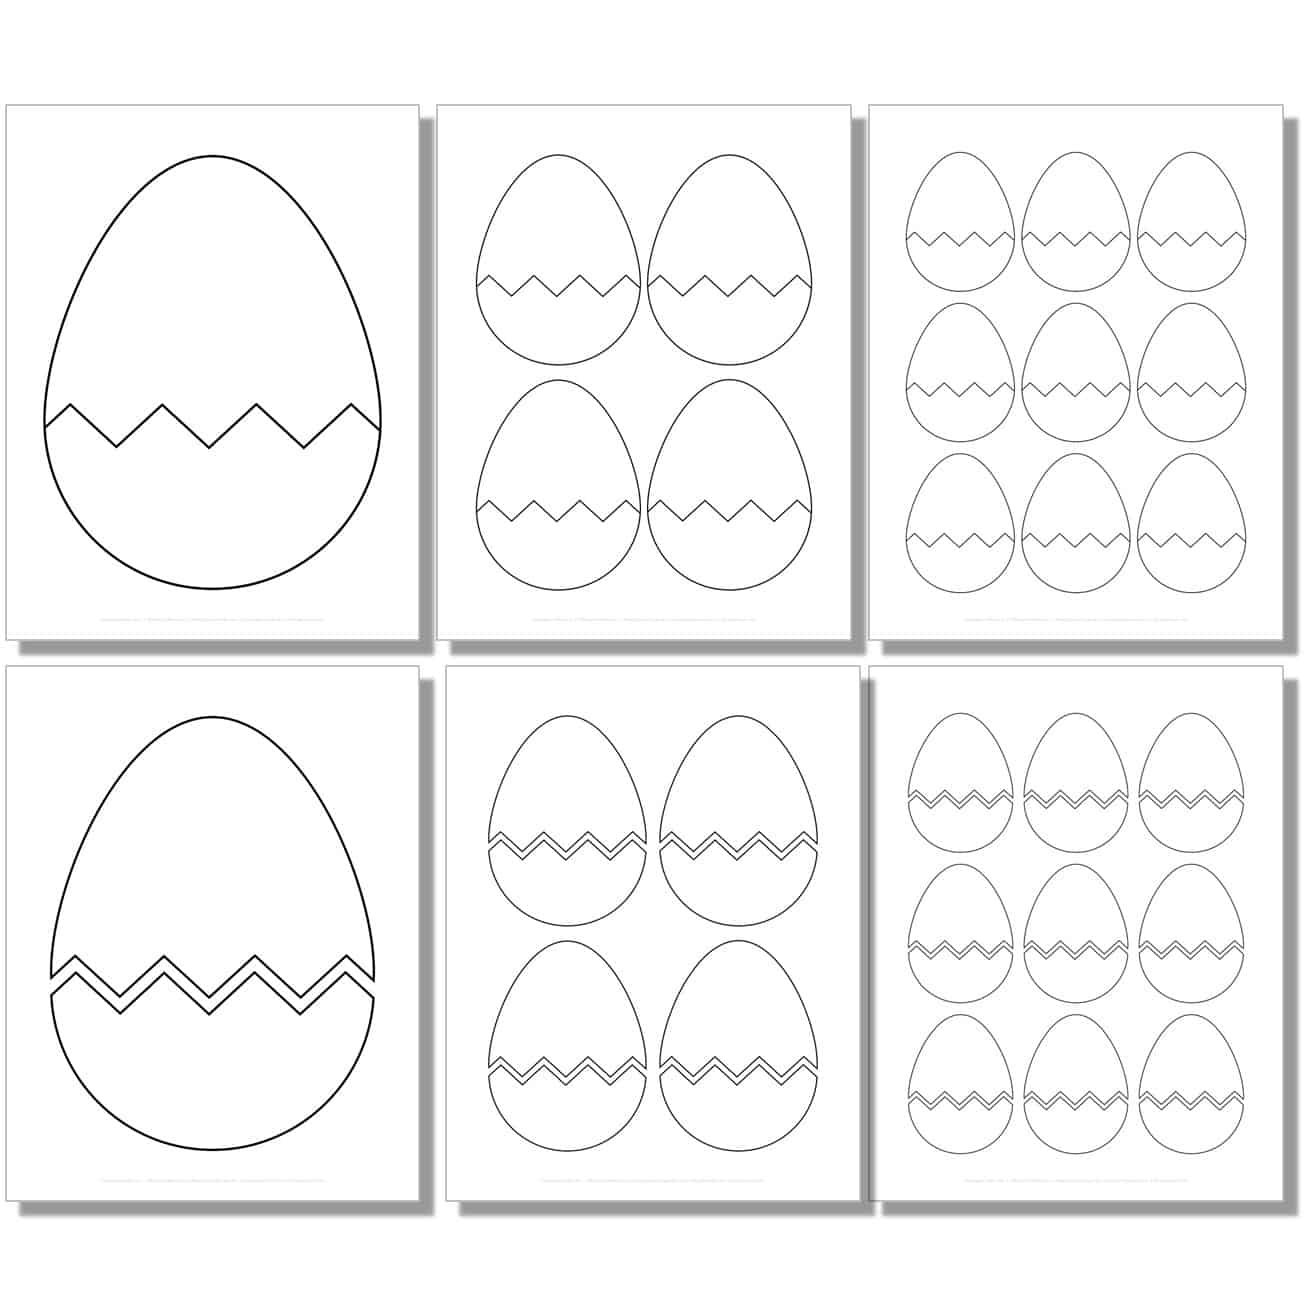 large, medium, small bottom cracked easter egg templates, outlines, stencils.